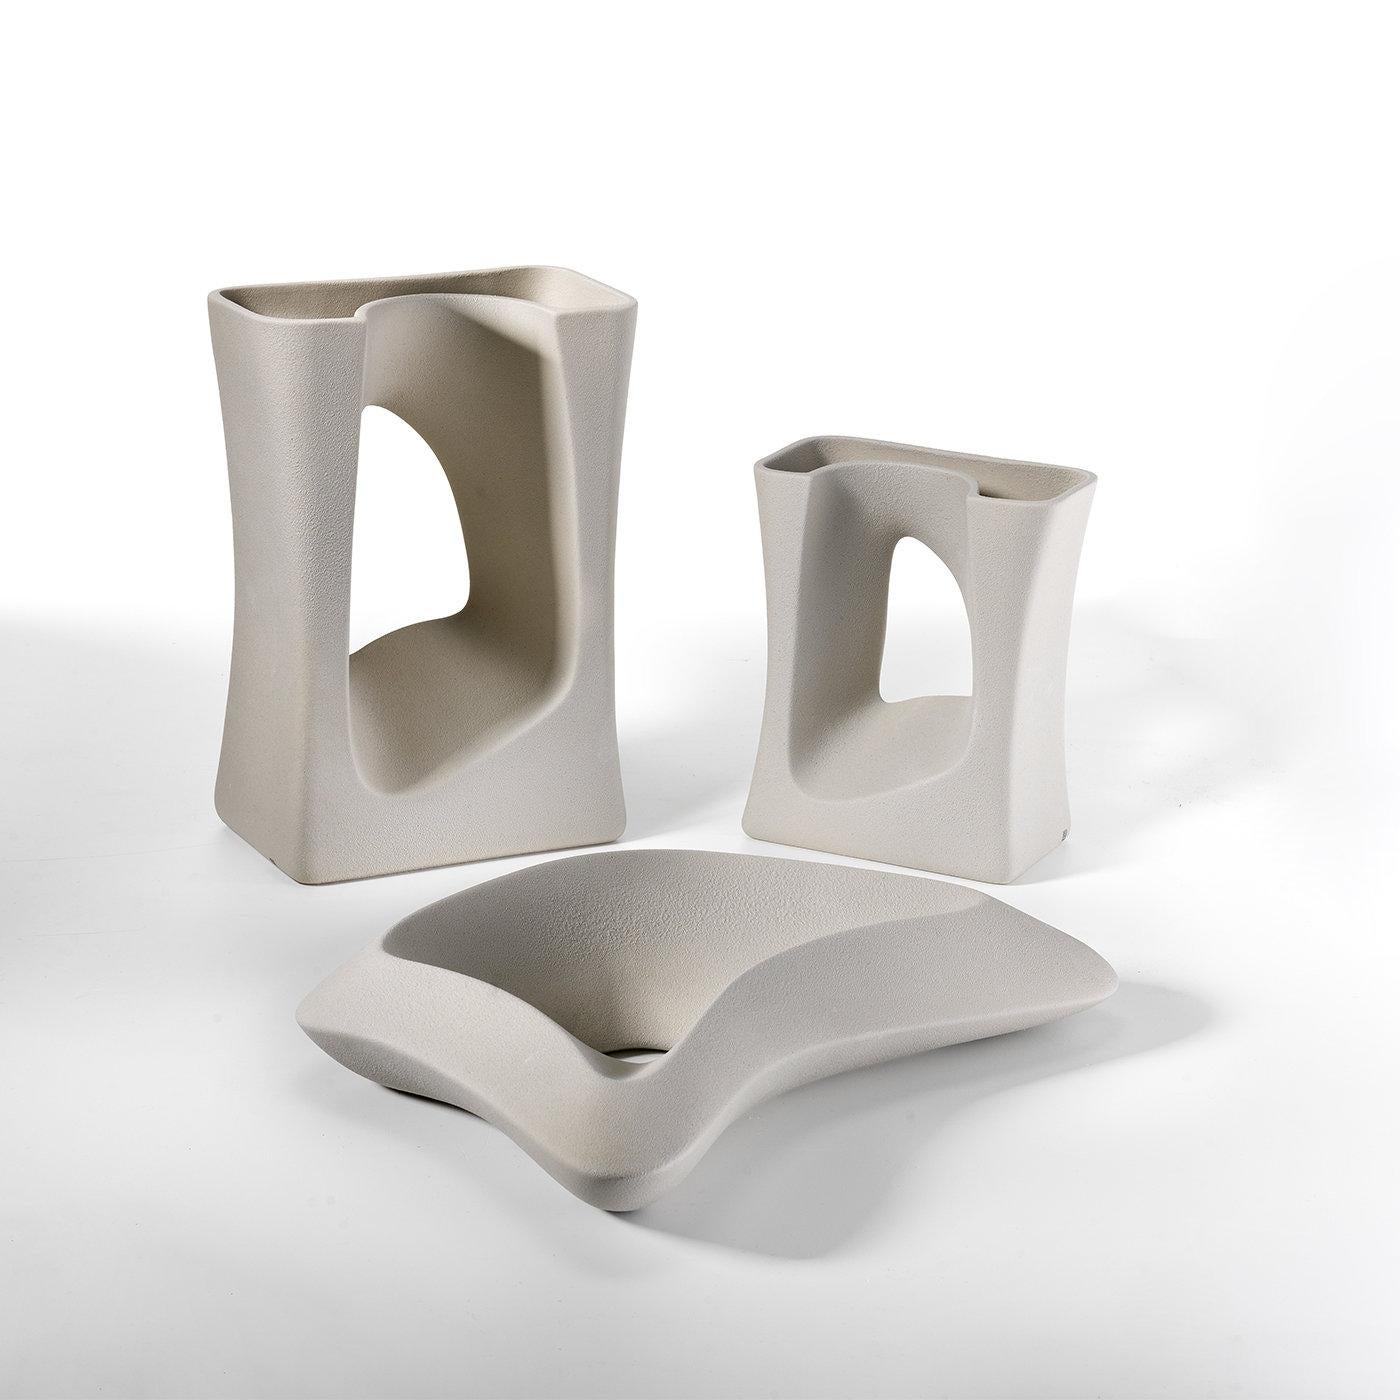 The Small Vase by Tiziano Panigas is characterized by a frame style design providing two sections for the flower stems. Perfect to display in any casual or formal living space, the unique vase is crafted from high quality white ceramic and is